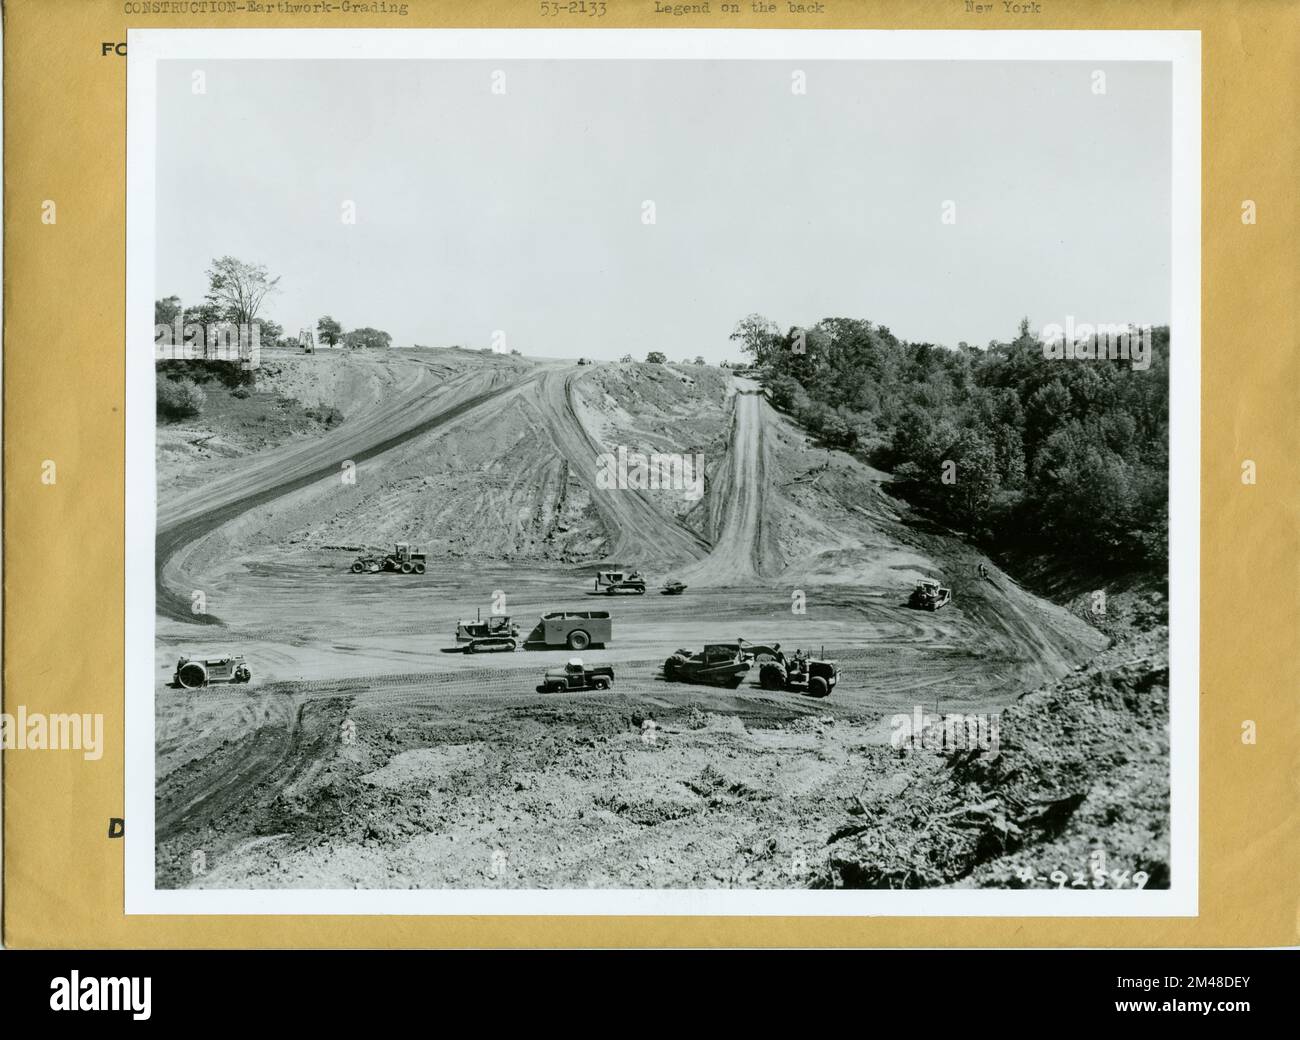 Earthwork Construction Equipment. Original caption: Construction near Herkimer, New York of the New York Thruway. Equipment includes Caterpillar DW20 Tractors with No. 20 Scrapers, D8 Tractors and No. 12 Motor Graders. Credit: Caterpillar Tractor Co., Peoria, Ill. State: New York. Stock Photo